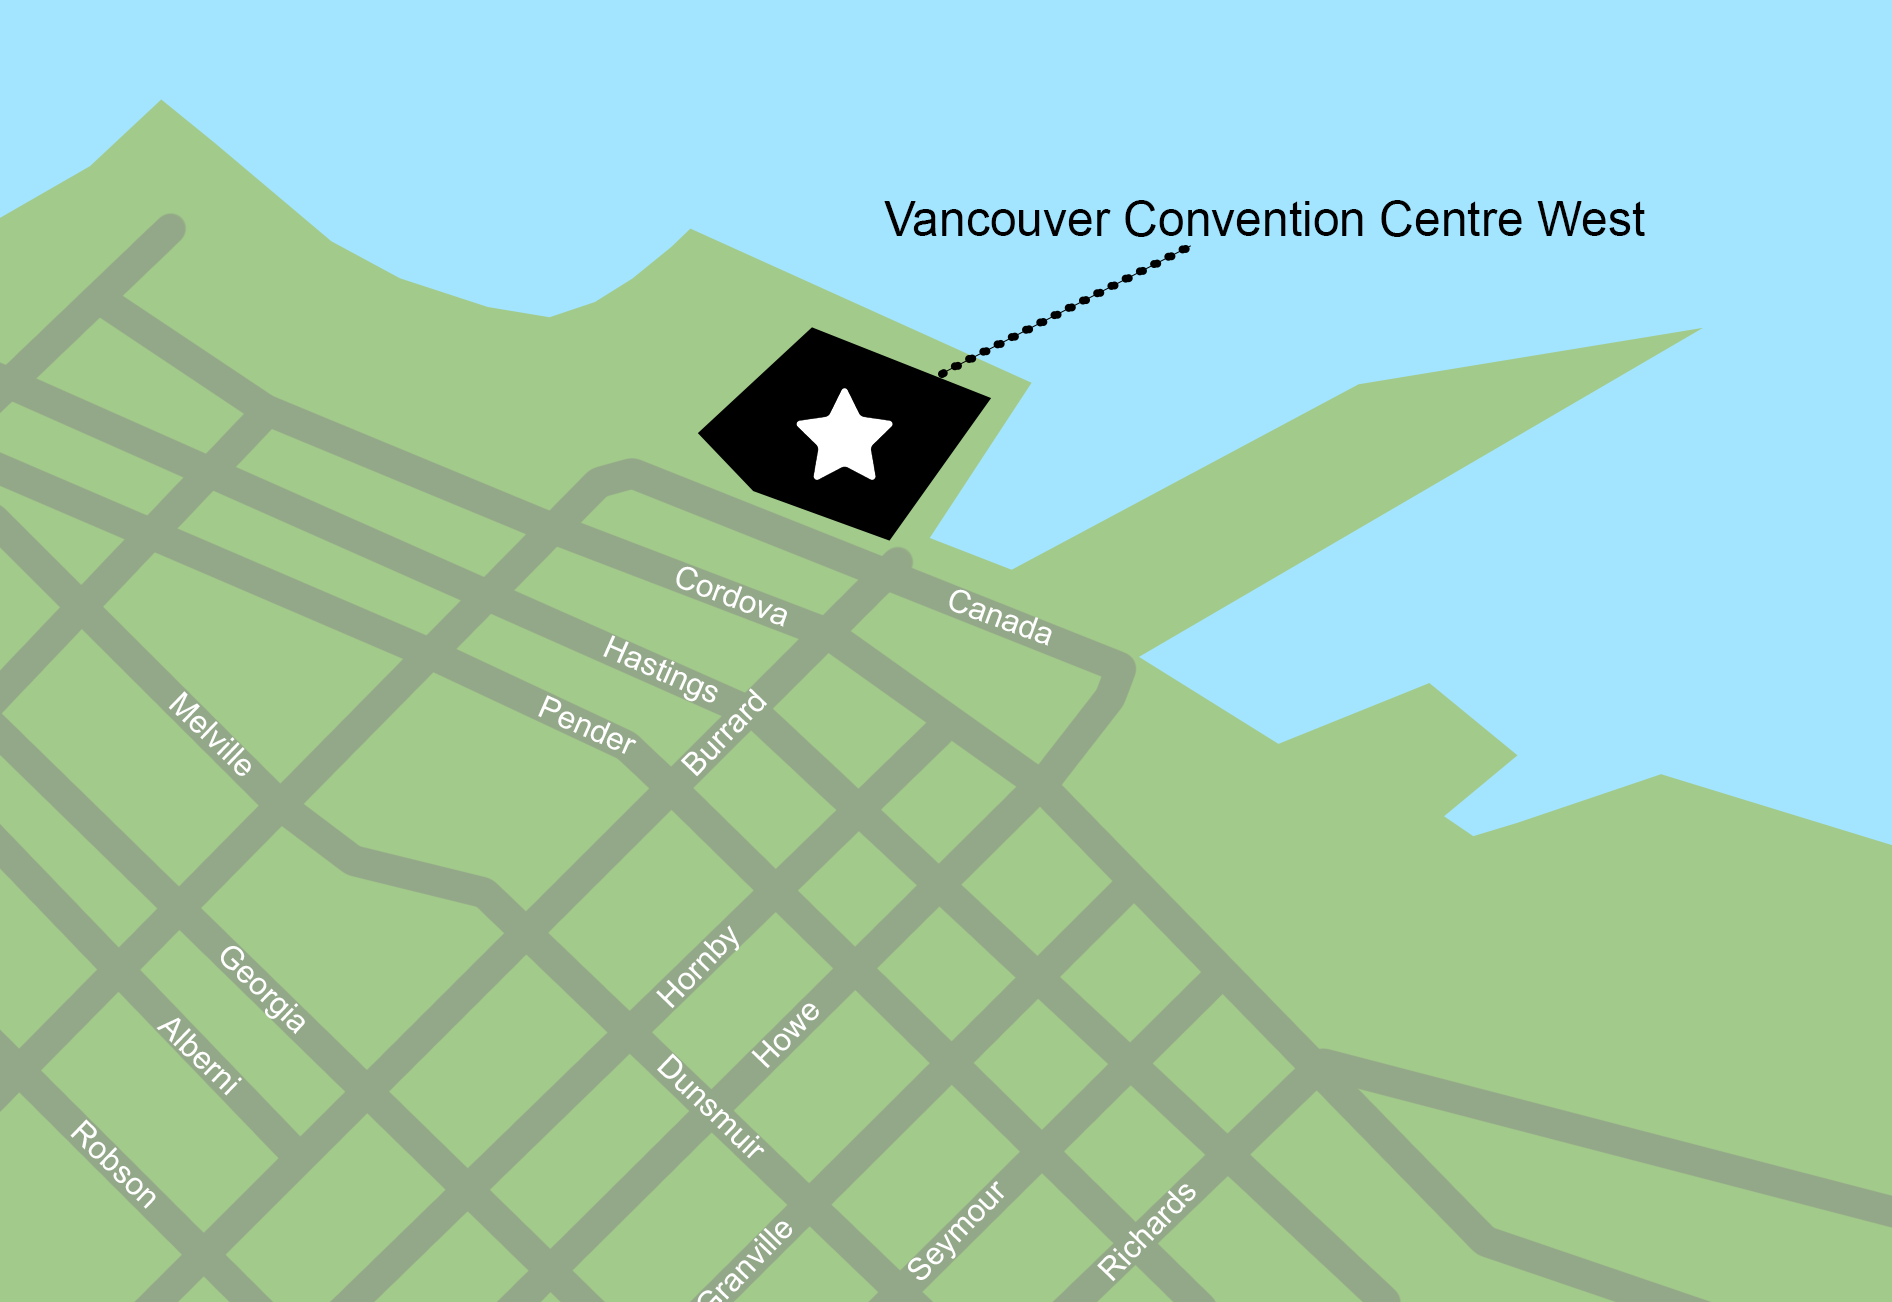 Map of the Vancouver Convention Centre West in downtown Vancouver.